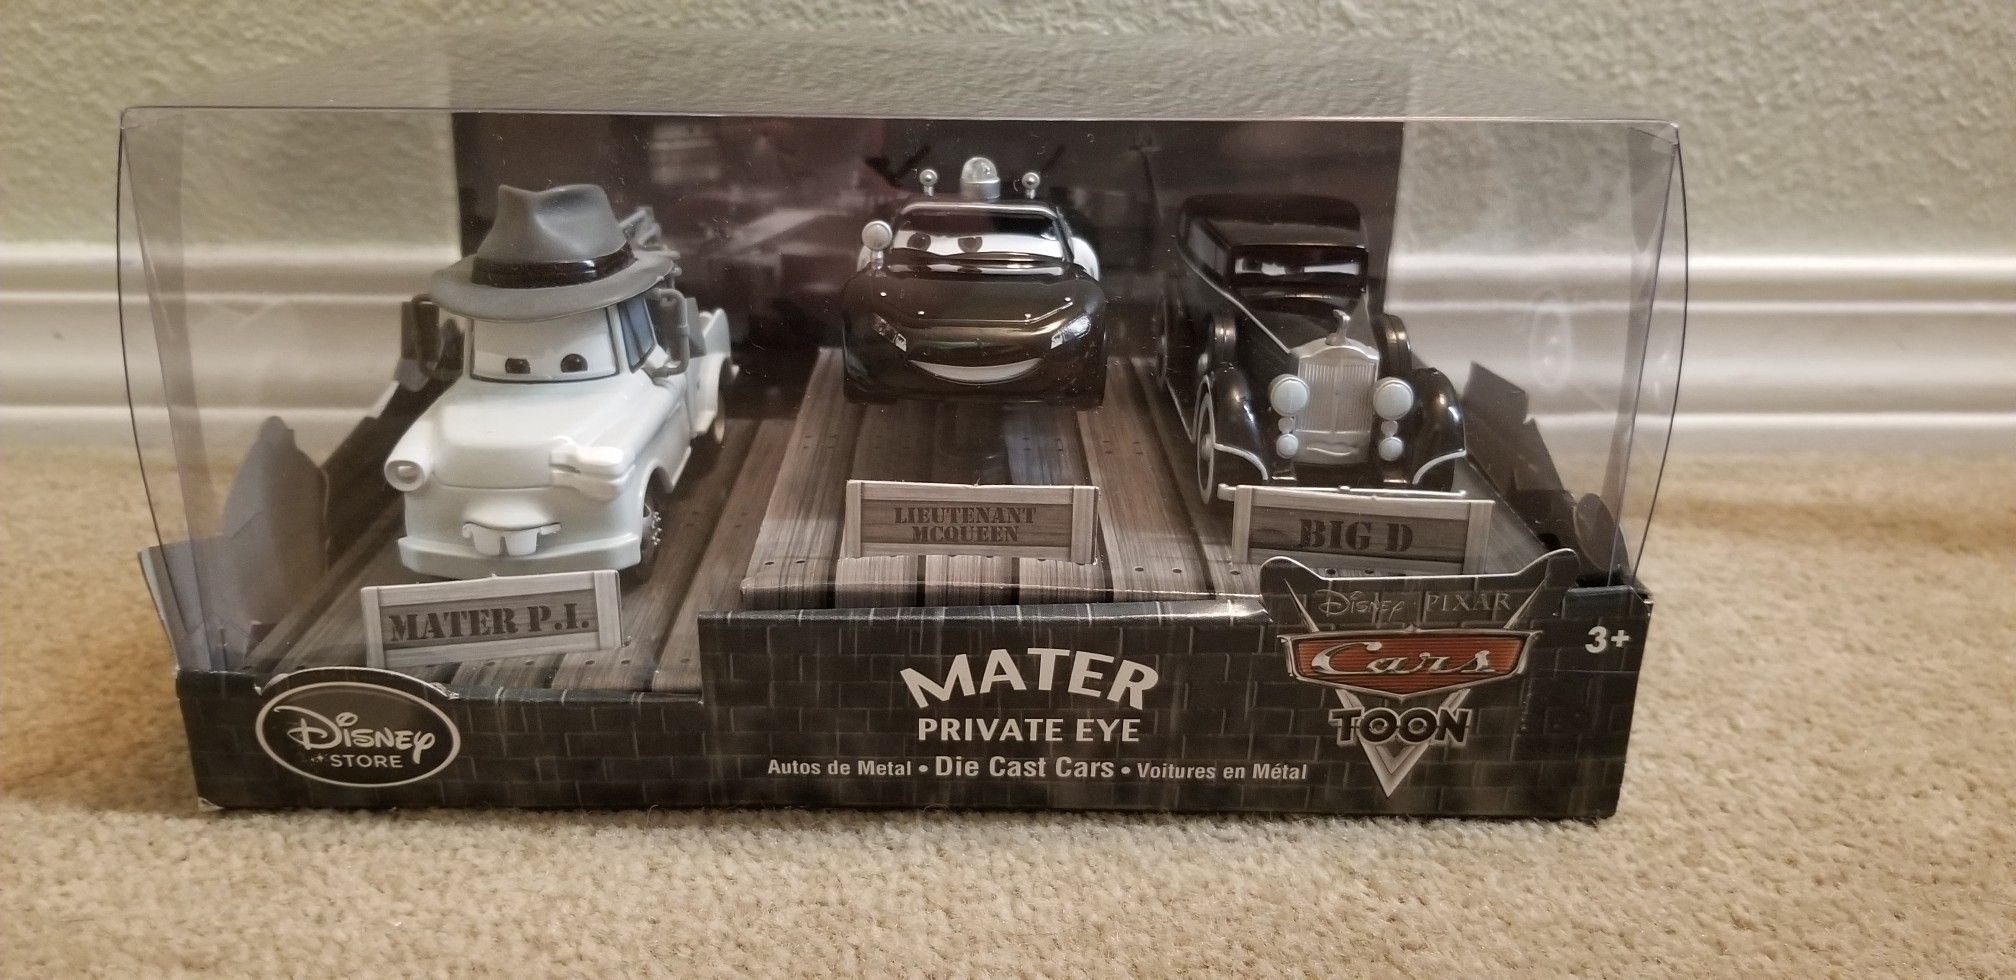 Disney Store Cars Toon Mater Private Eye Die Cast Cars